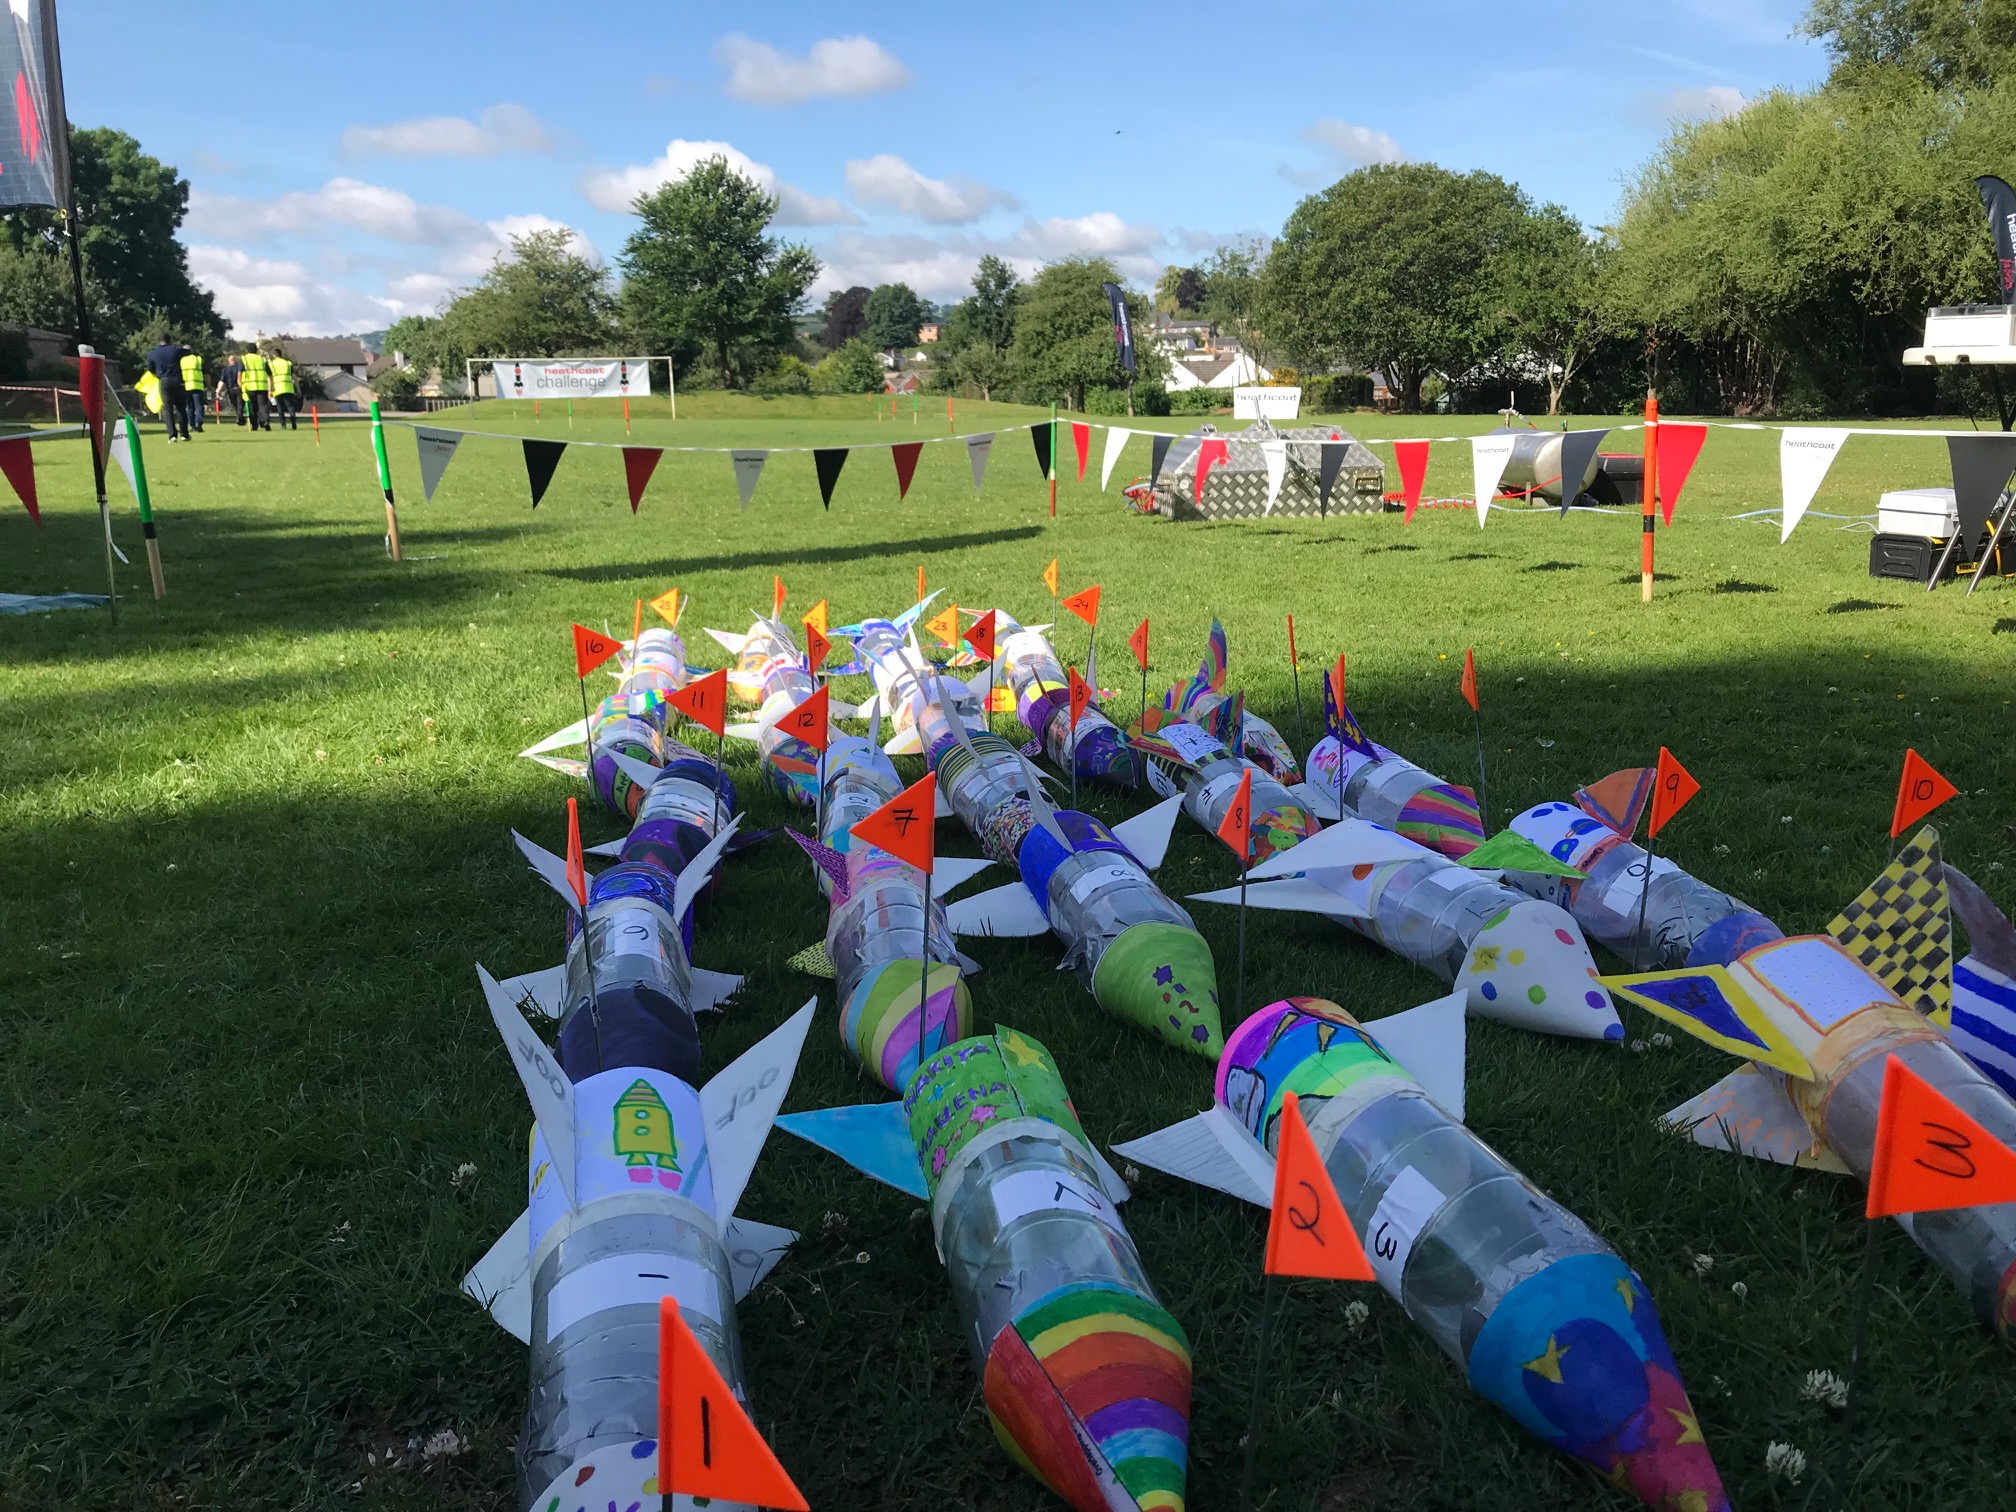 Rockets designed by Two Moors Primary School